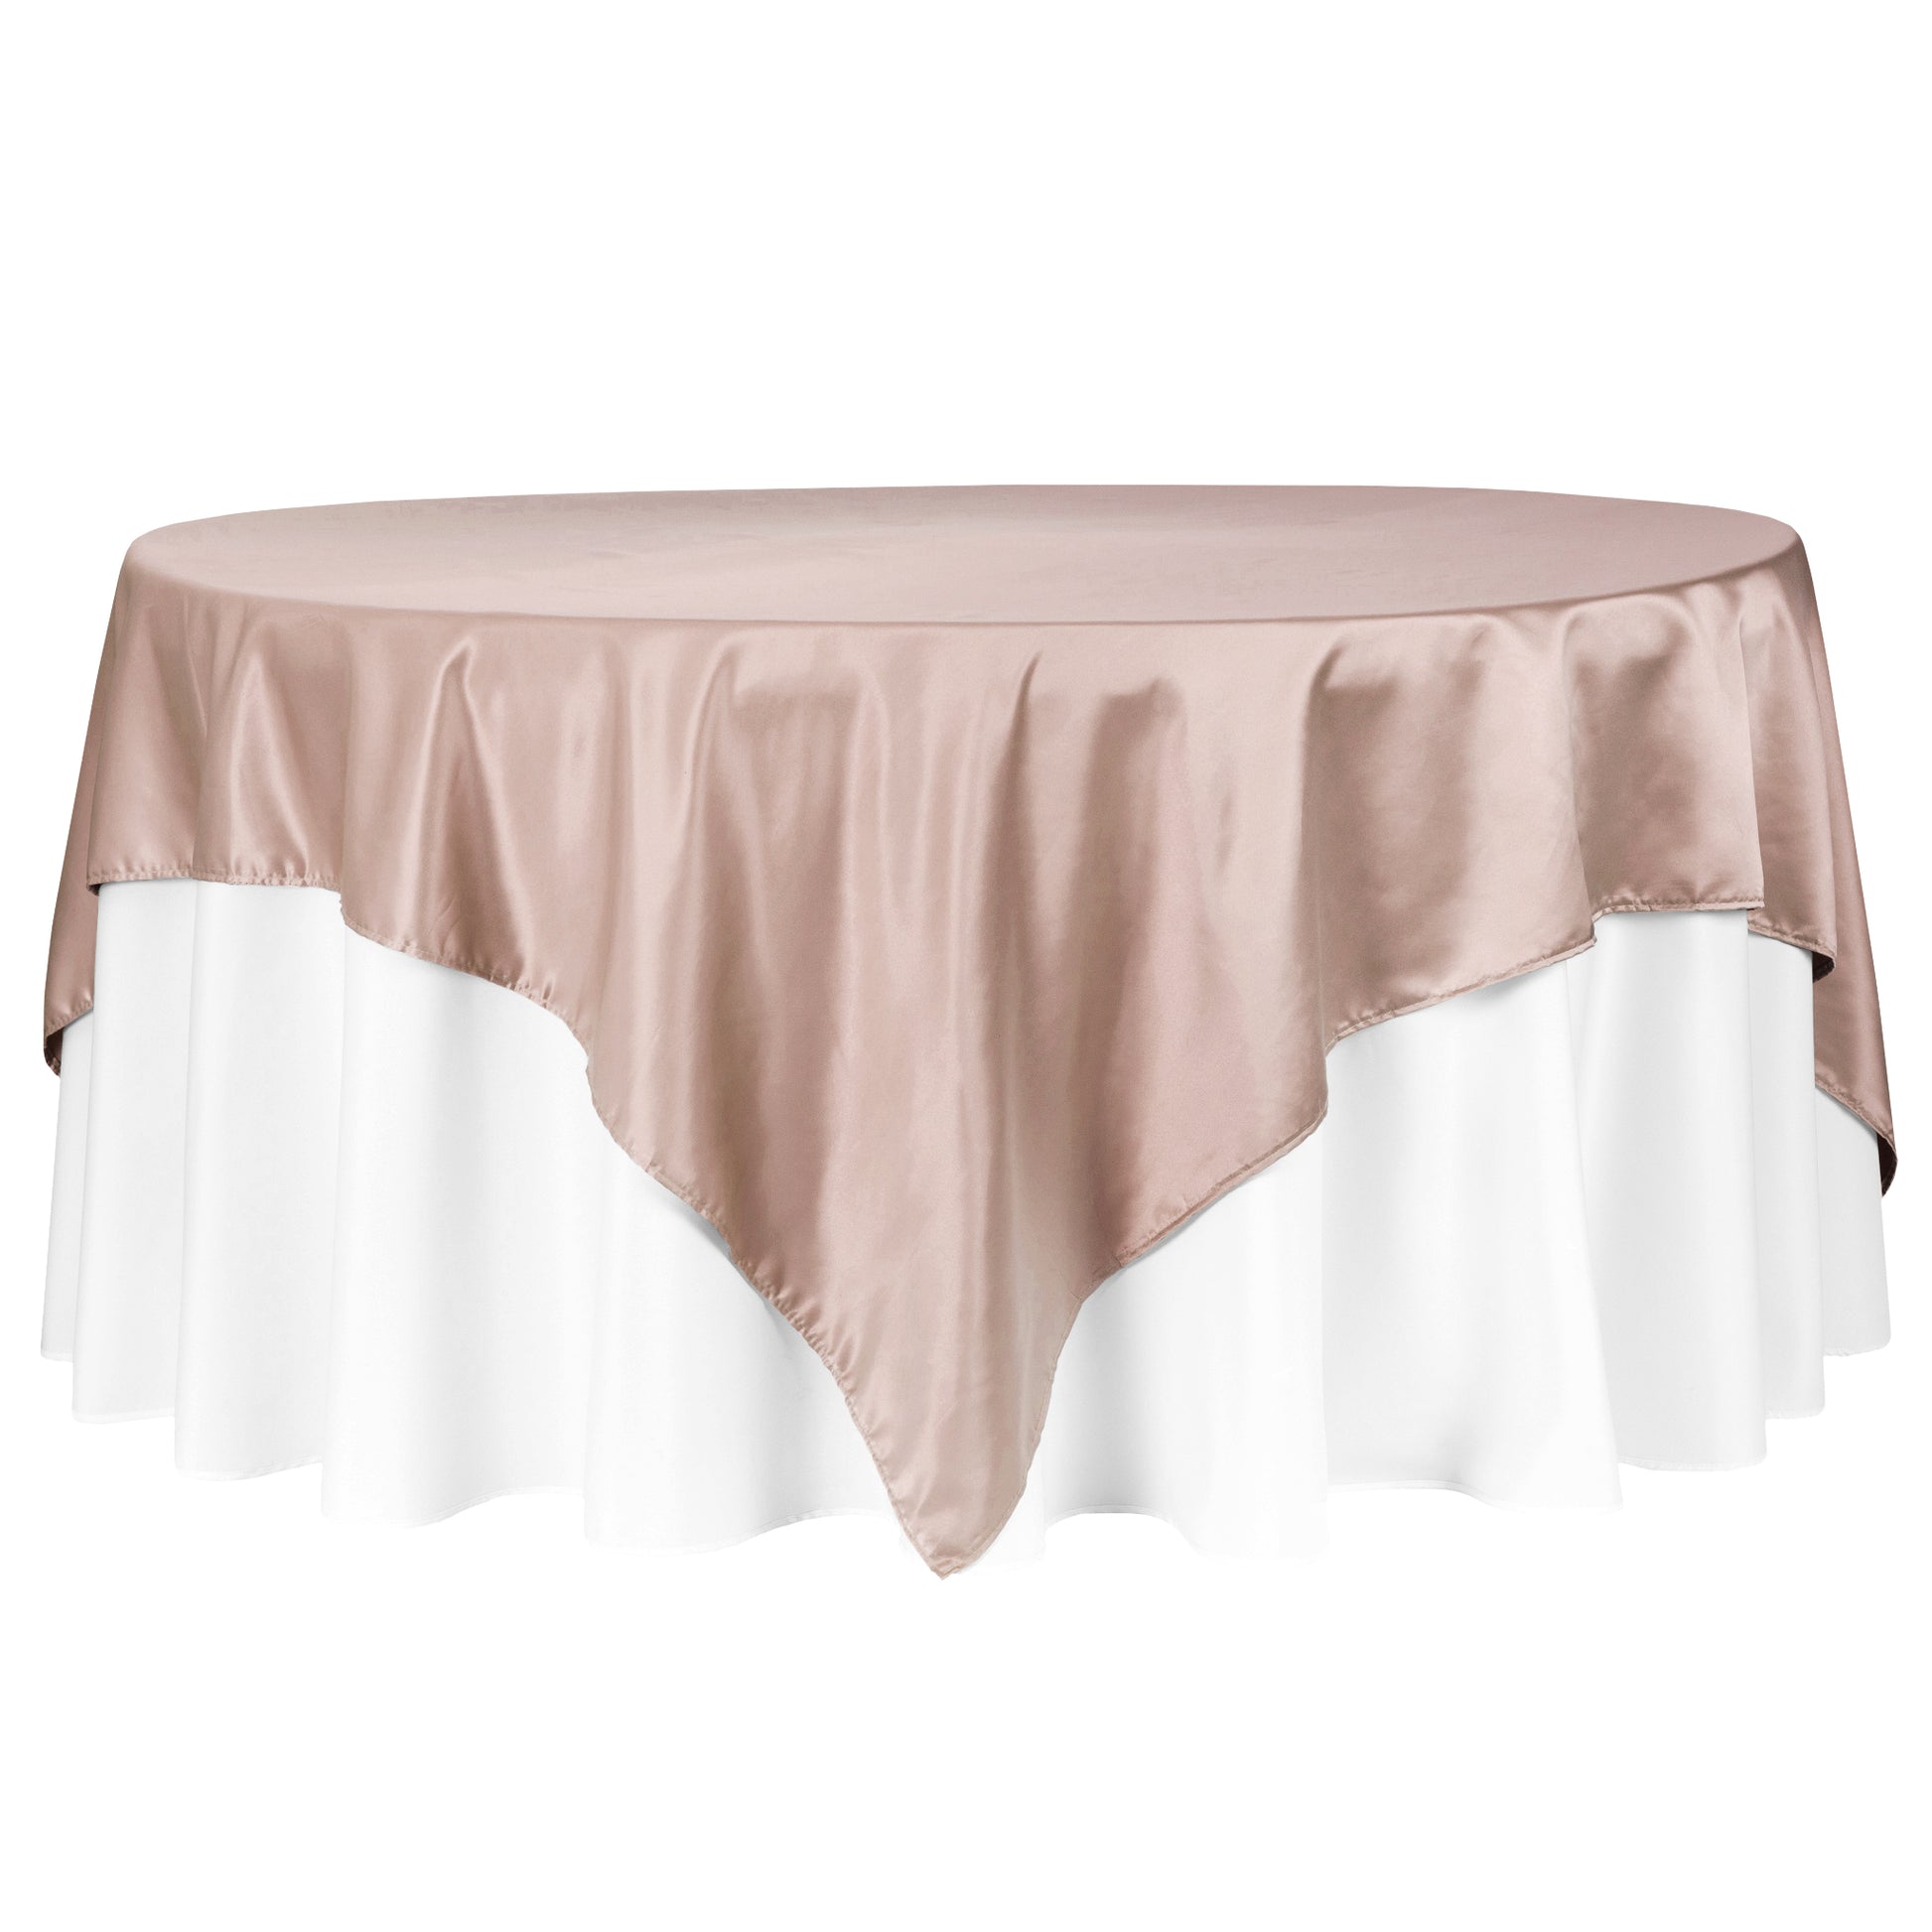 Square 90"x90" Lamour Satin Table Overlay - Taupe - CV Linens